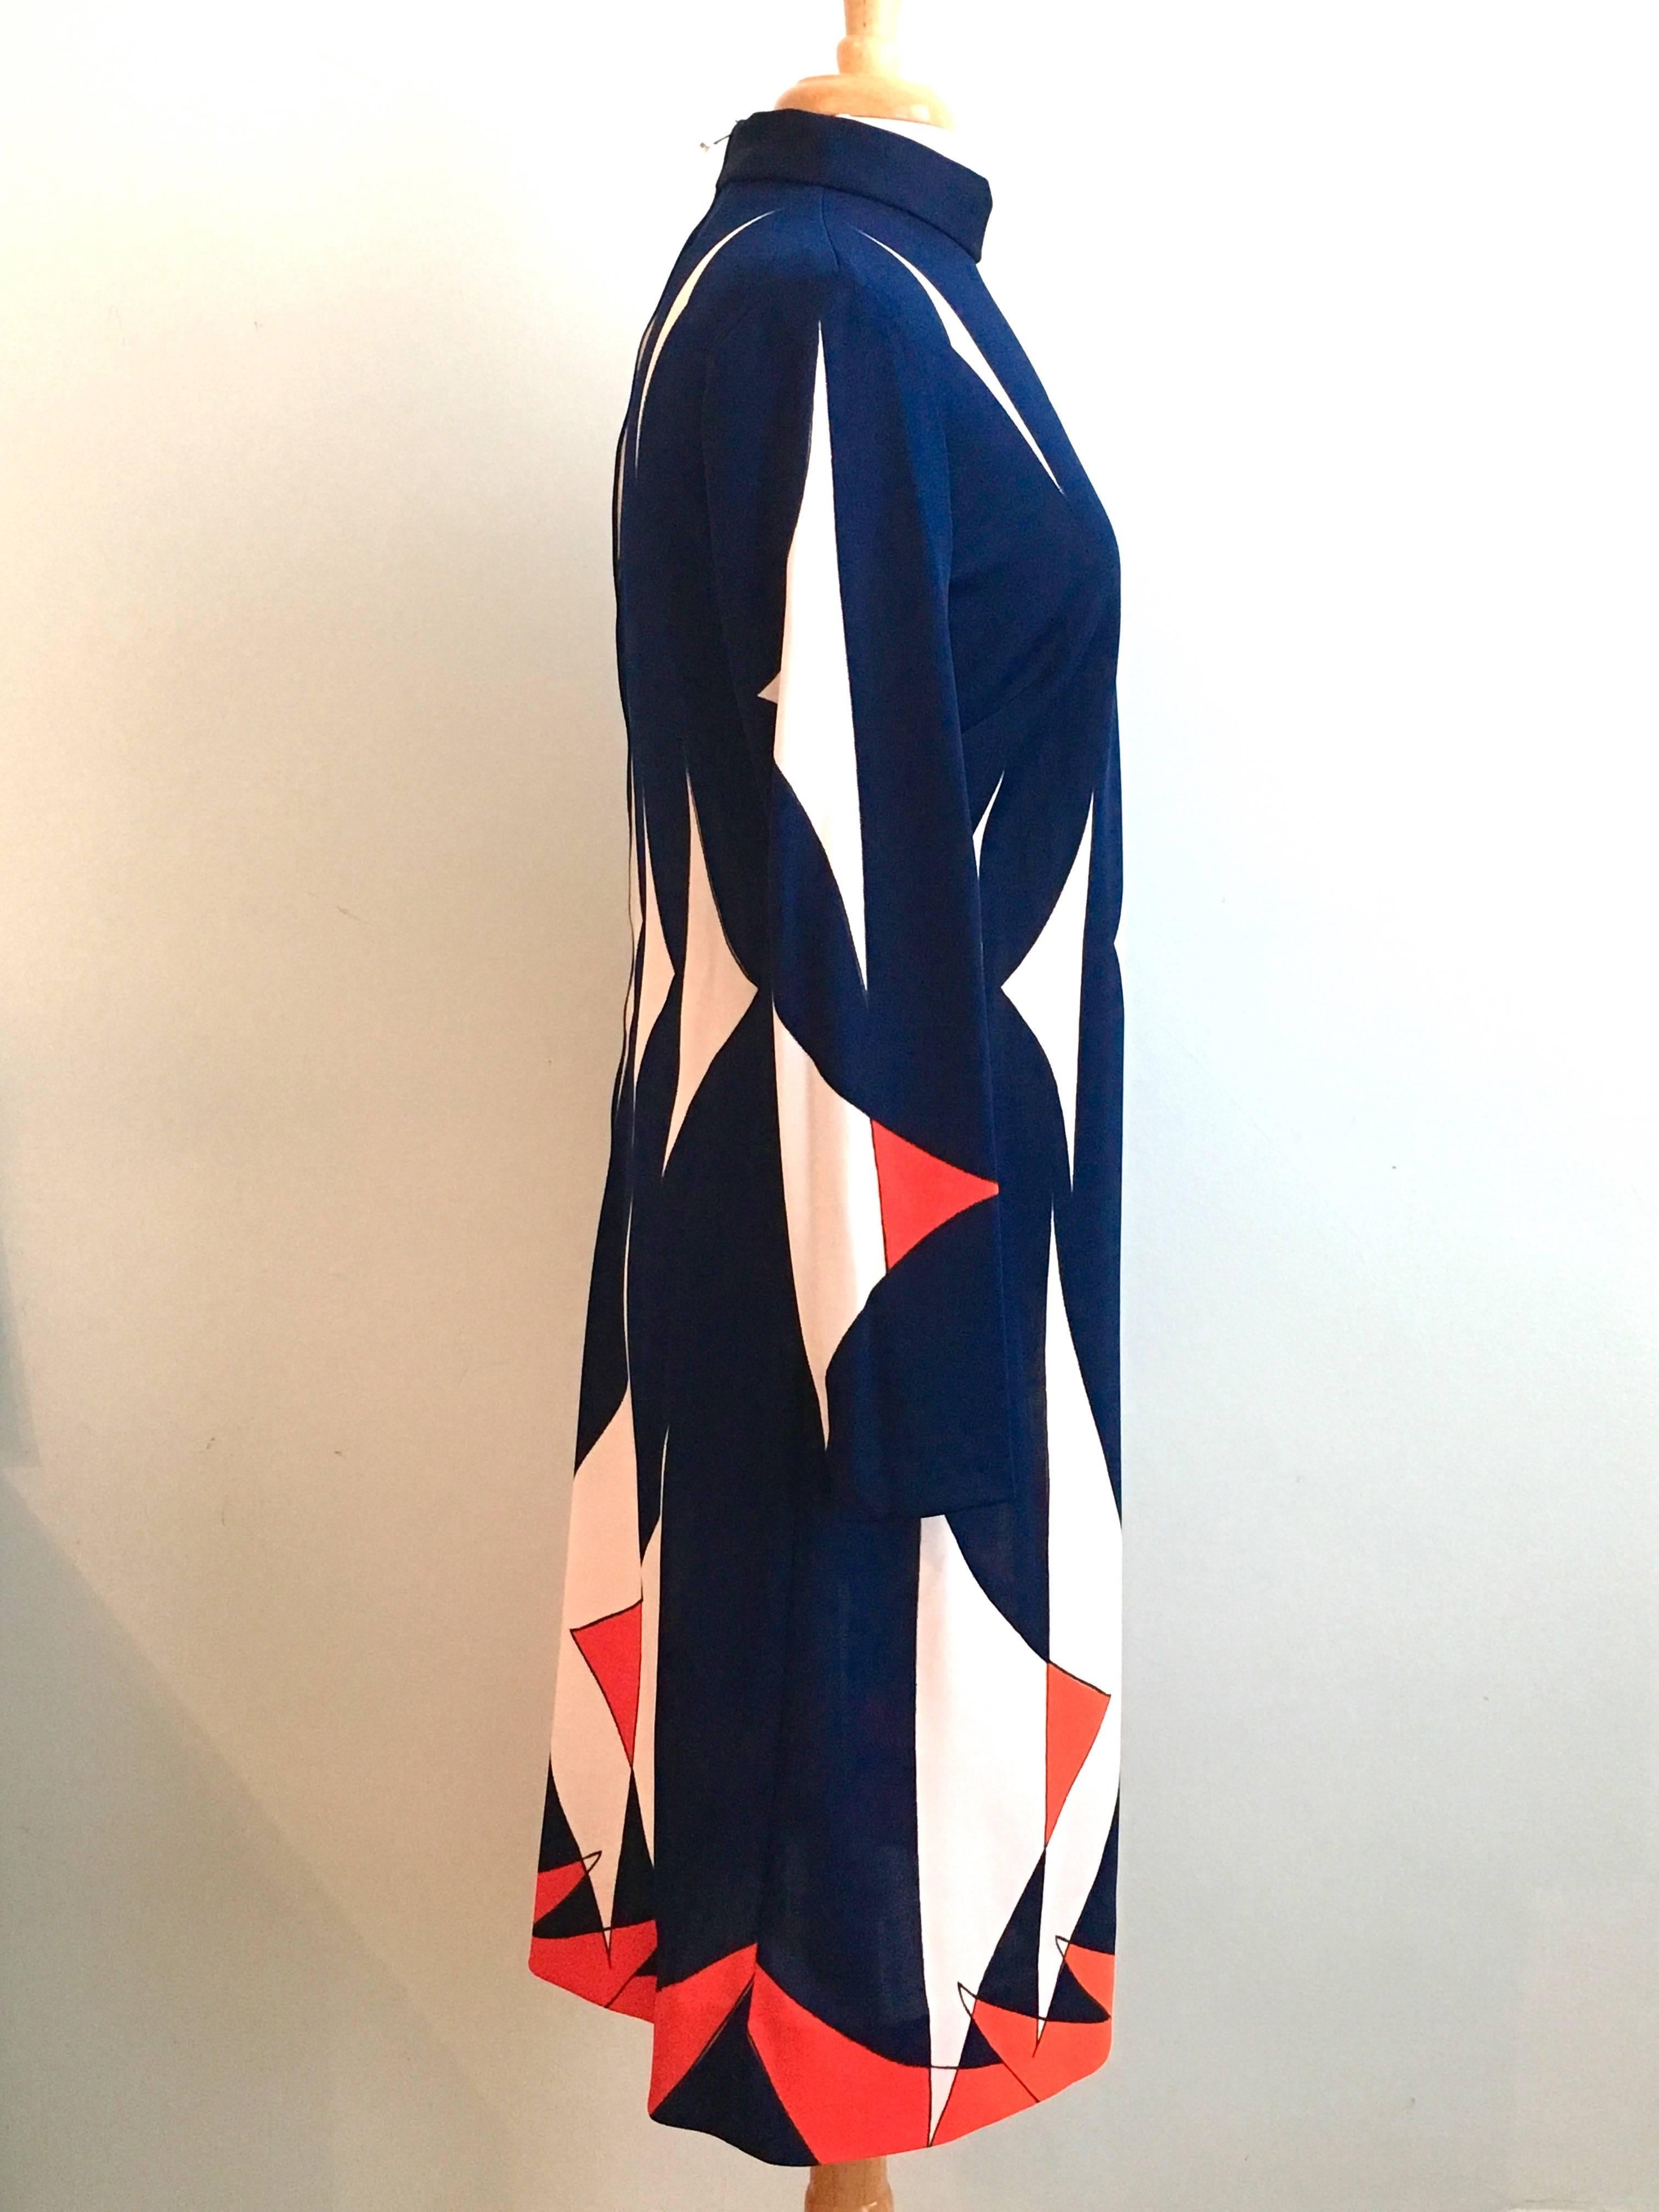 Women's 1970s Vera Neumann Red, White and Blue Graphic Dress